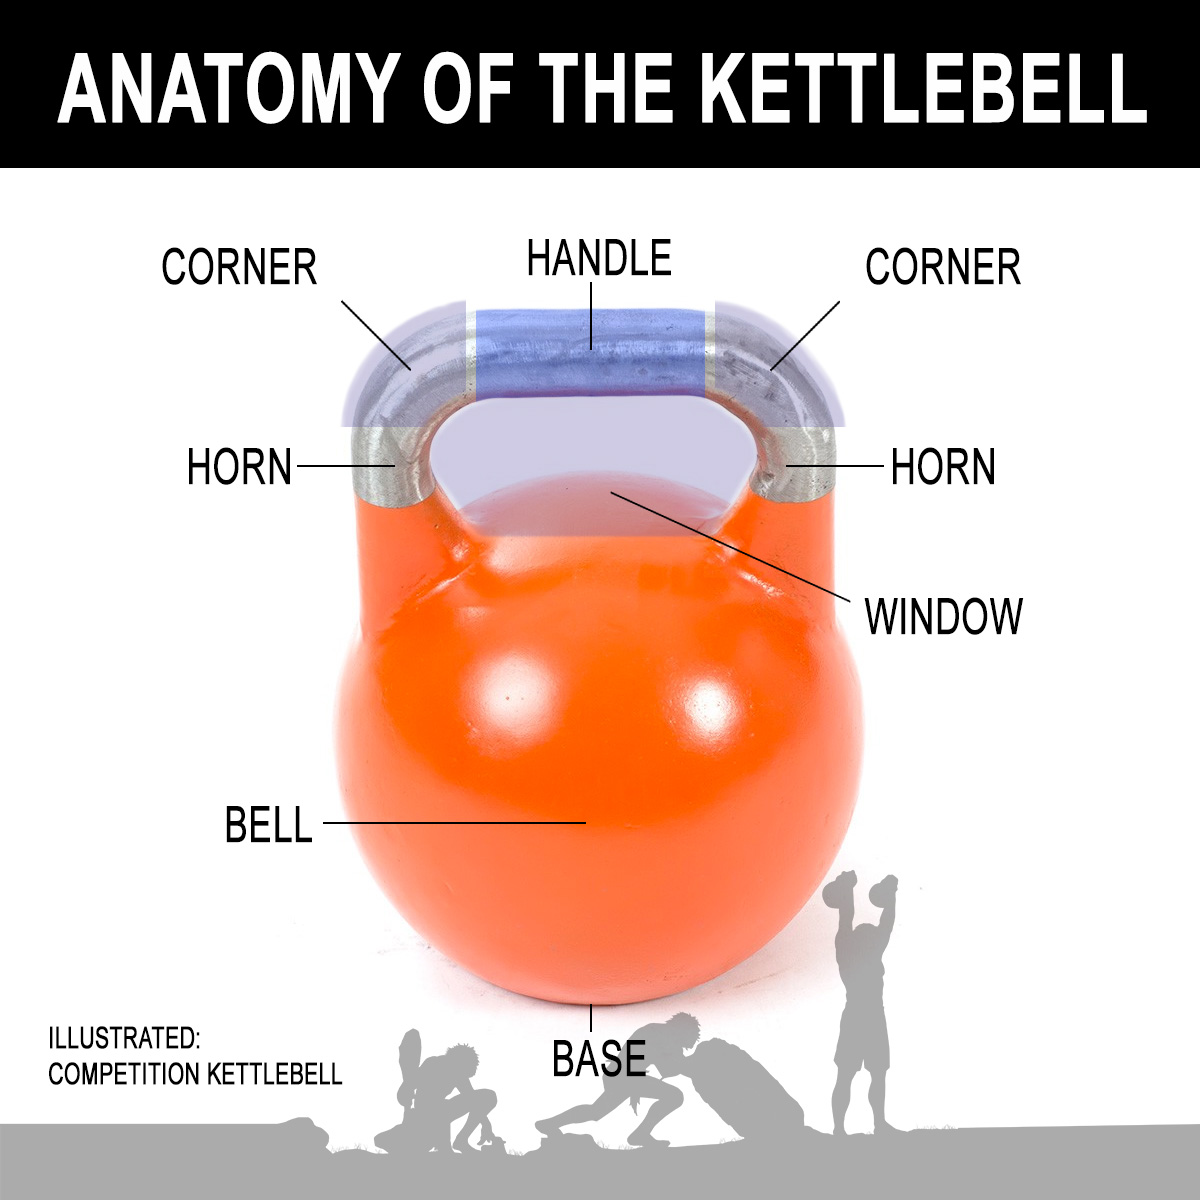 Anatomy of the kettlebell weights